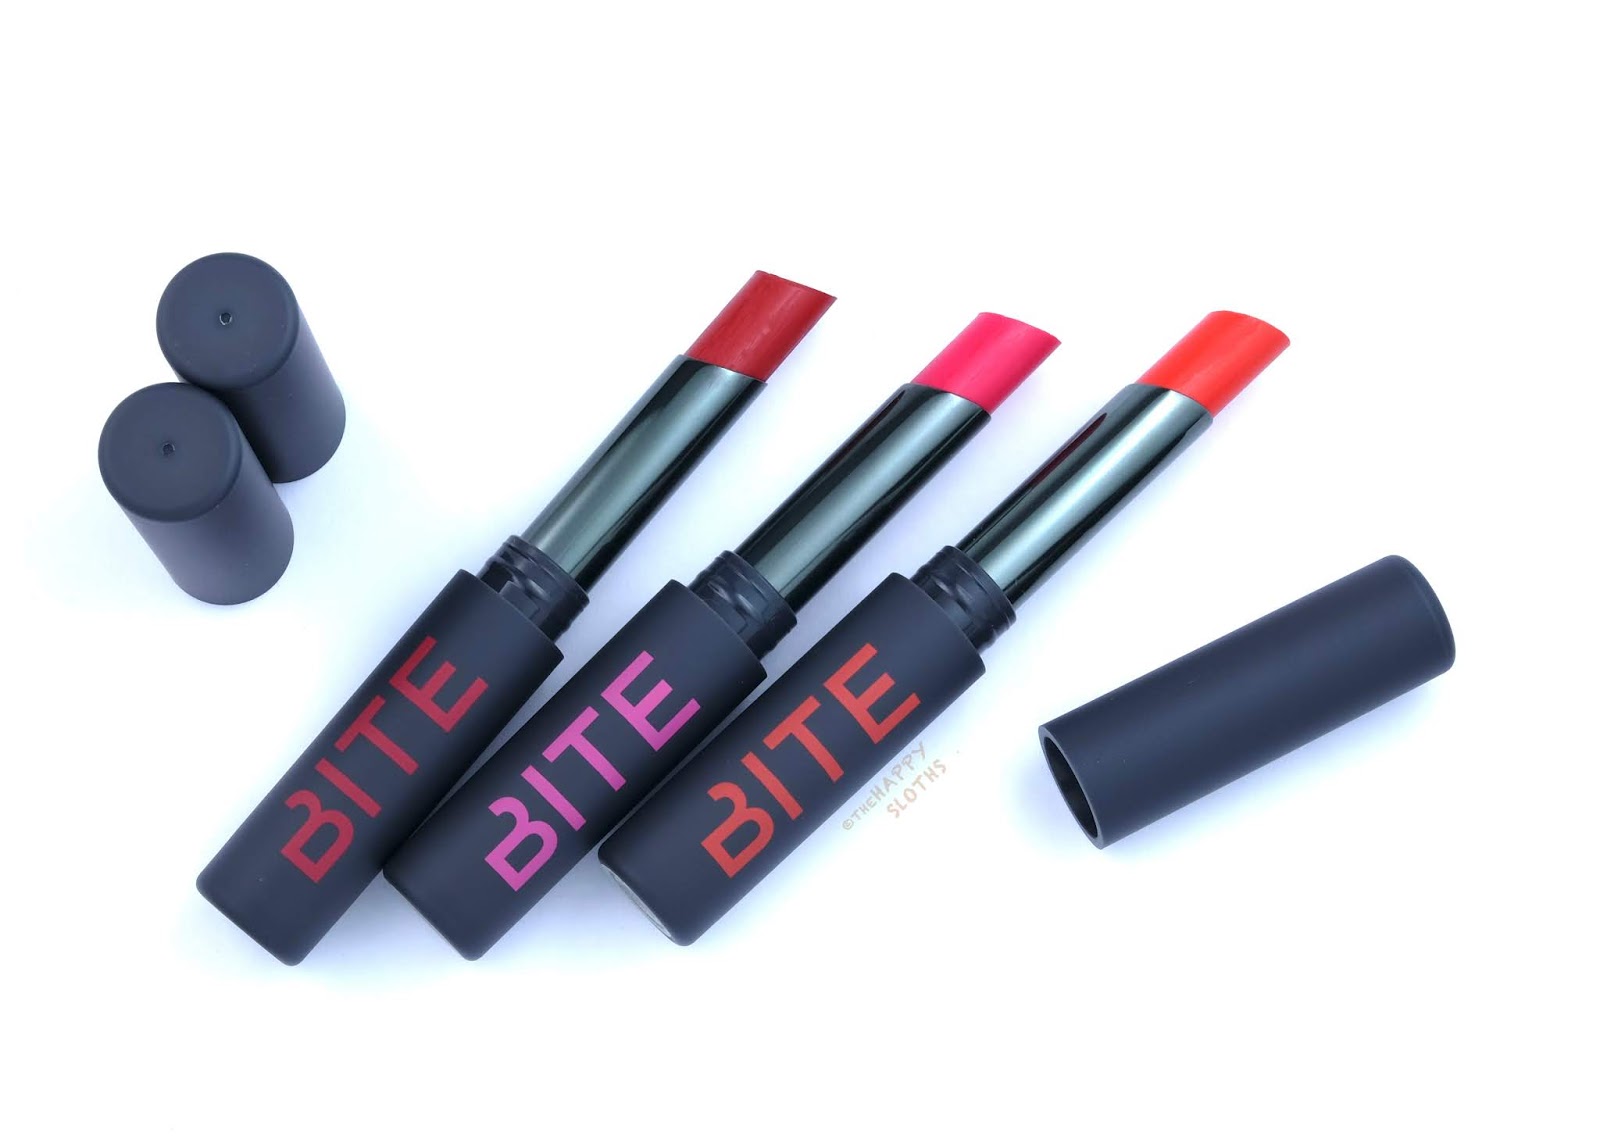 Bite Beauty | Outburst Longwear Lip Stain: Review and Swatches